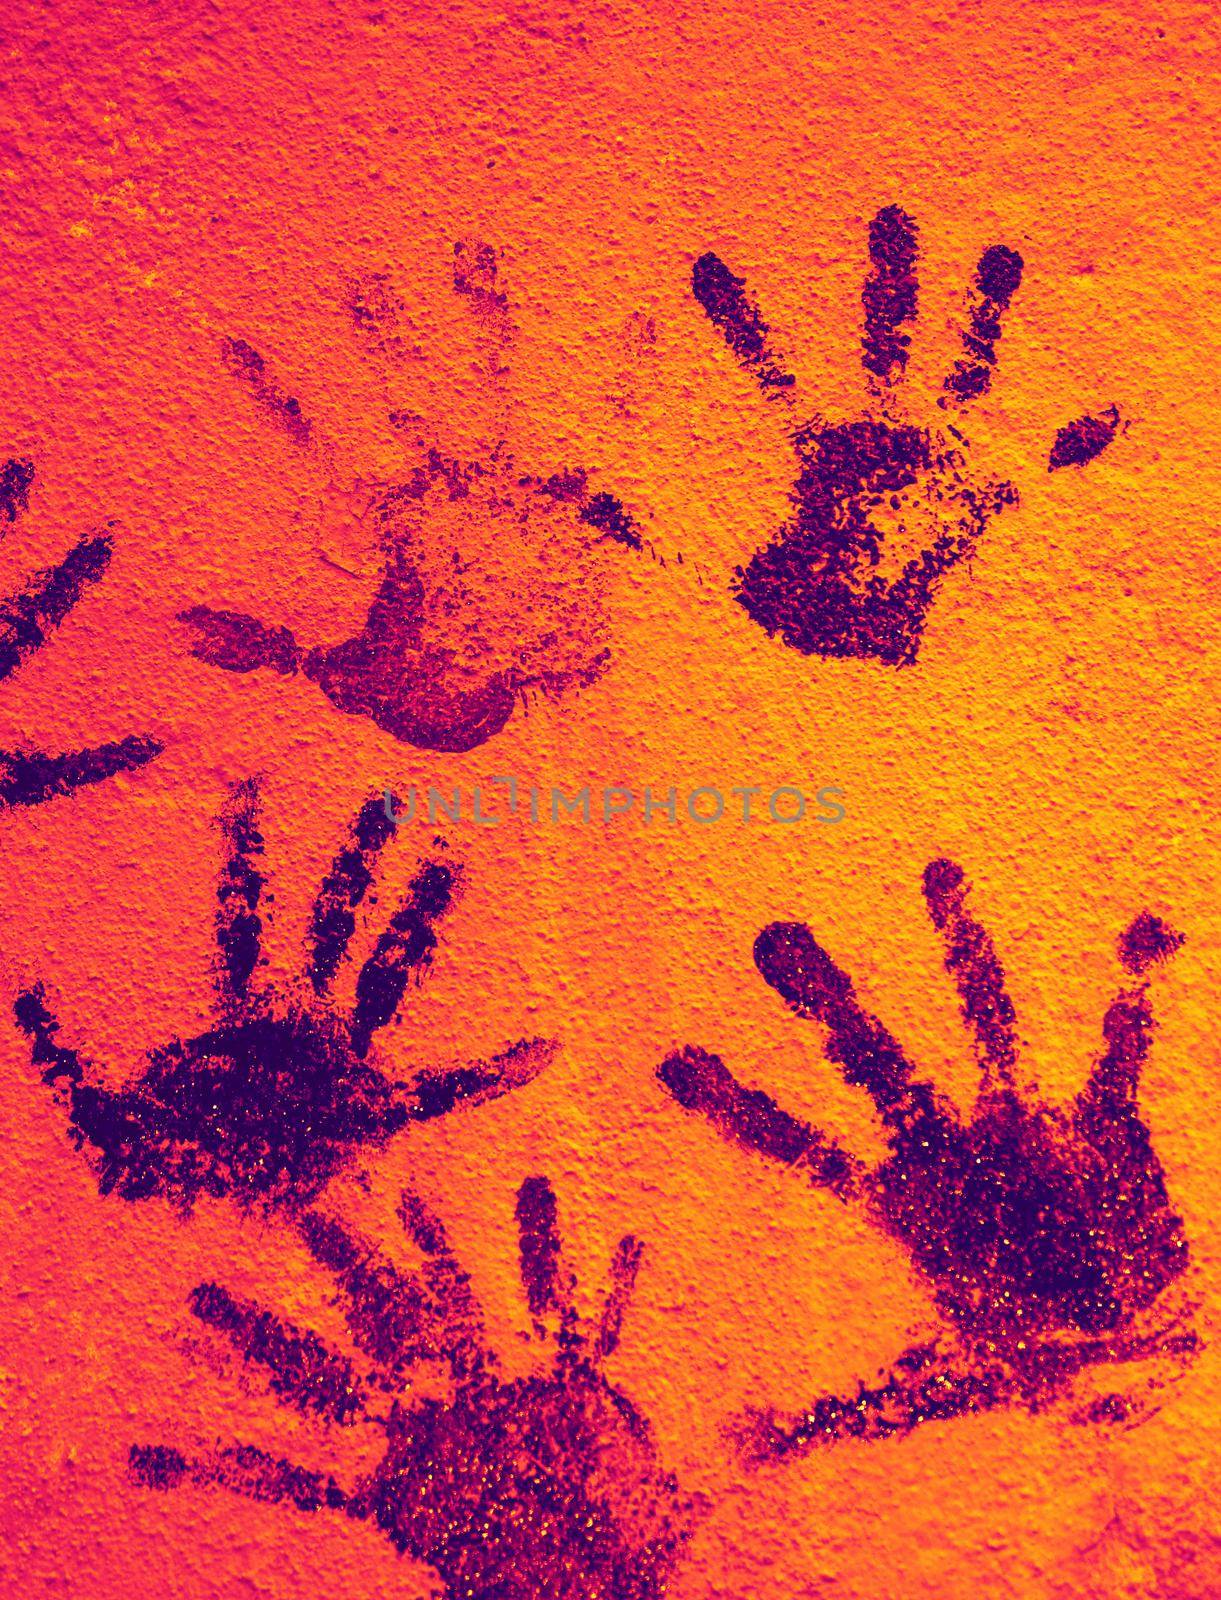 Multi-colored hand prints smeared with paint on wall by berkay